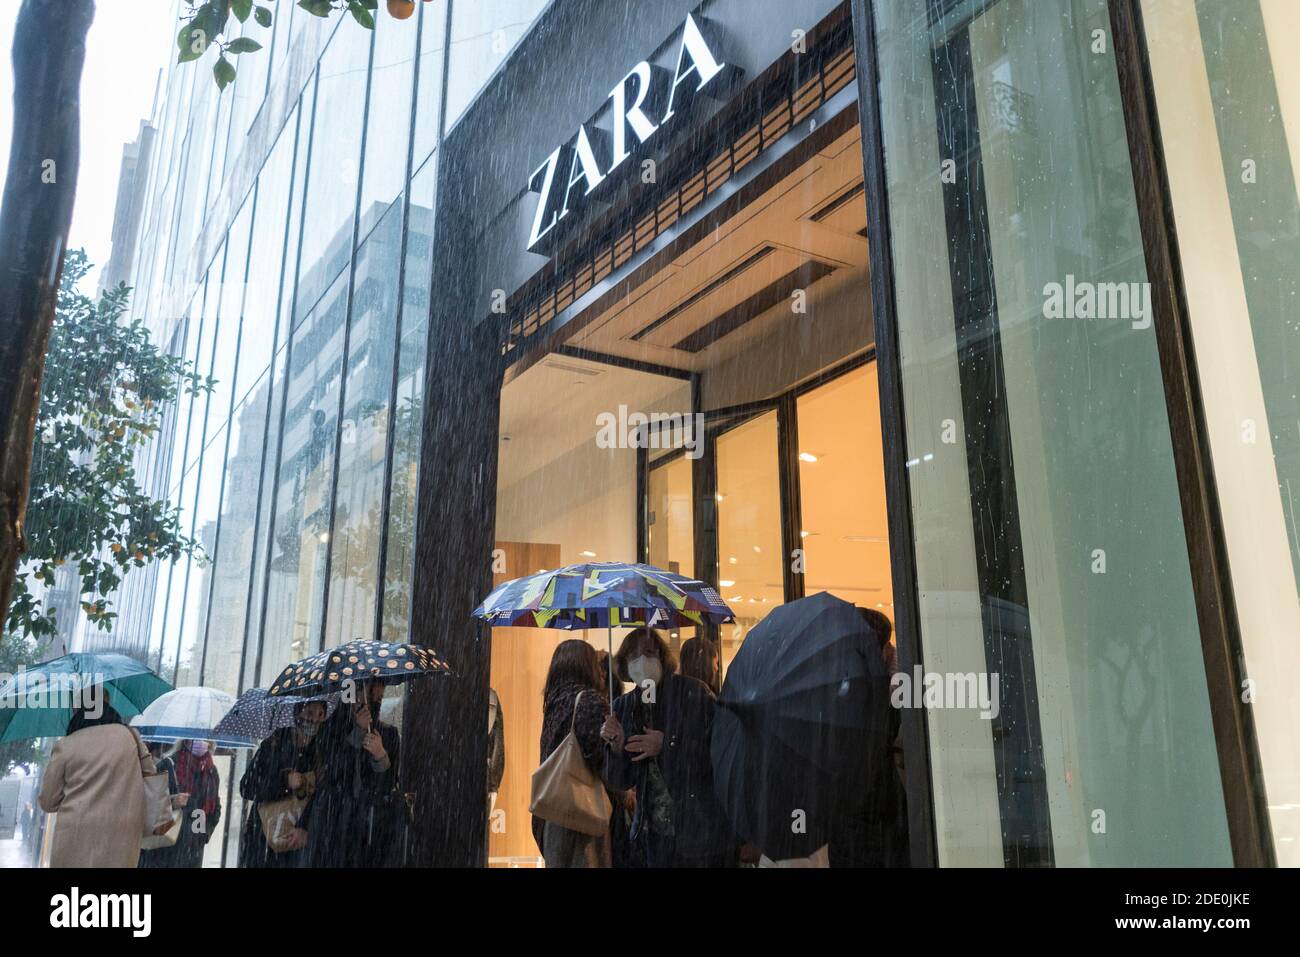 Valencia, Spain. 27th Nov, 2020. People with umbrellas taking shelter in  front of the Zara shop